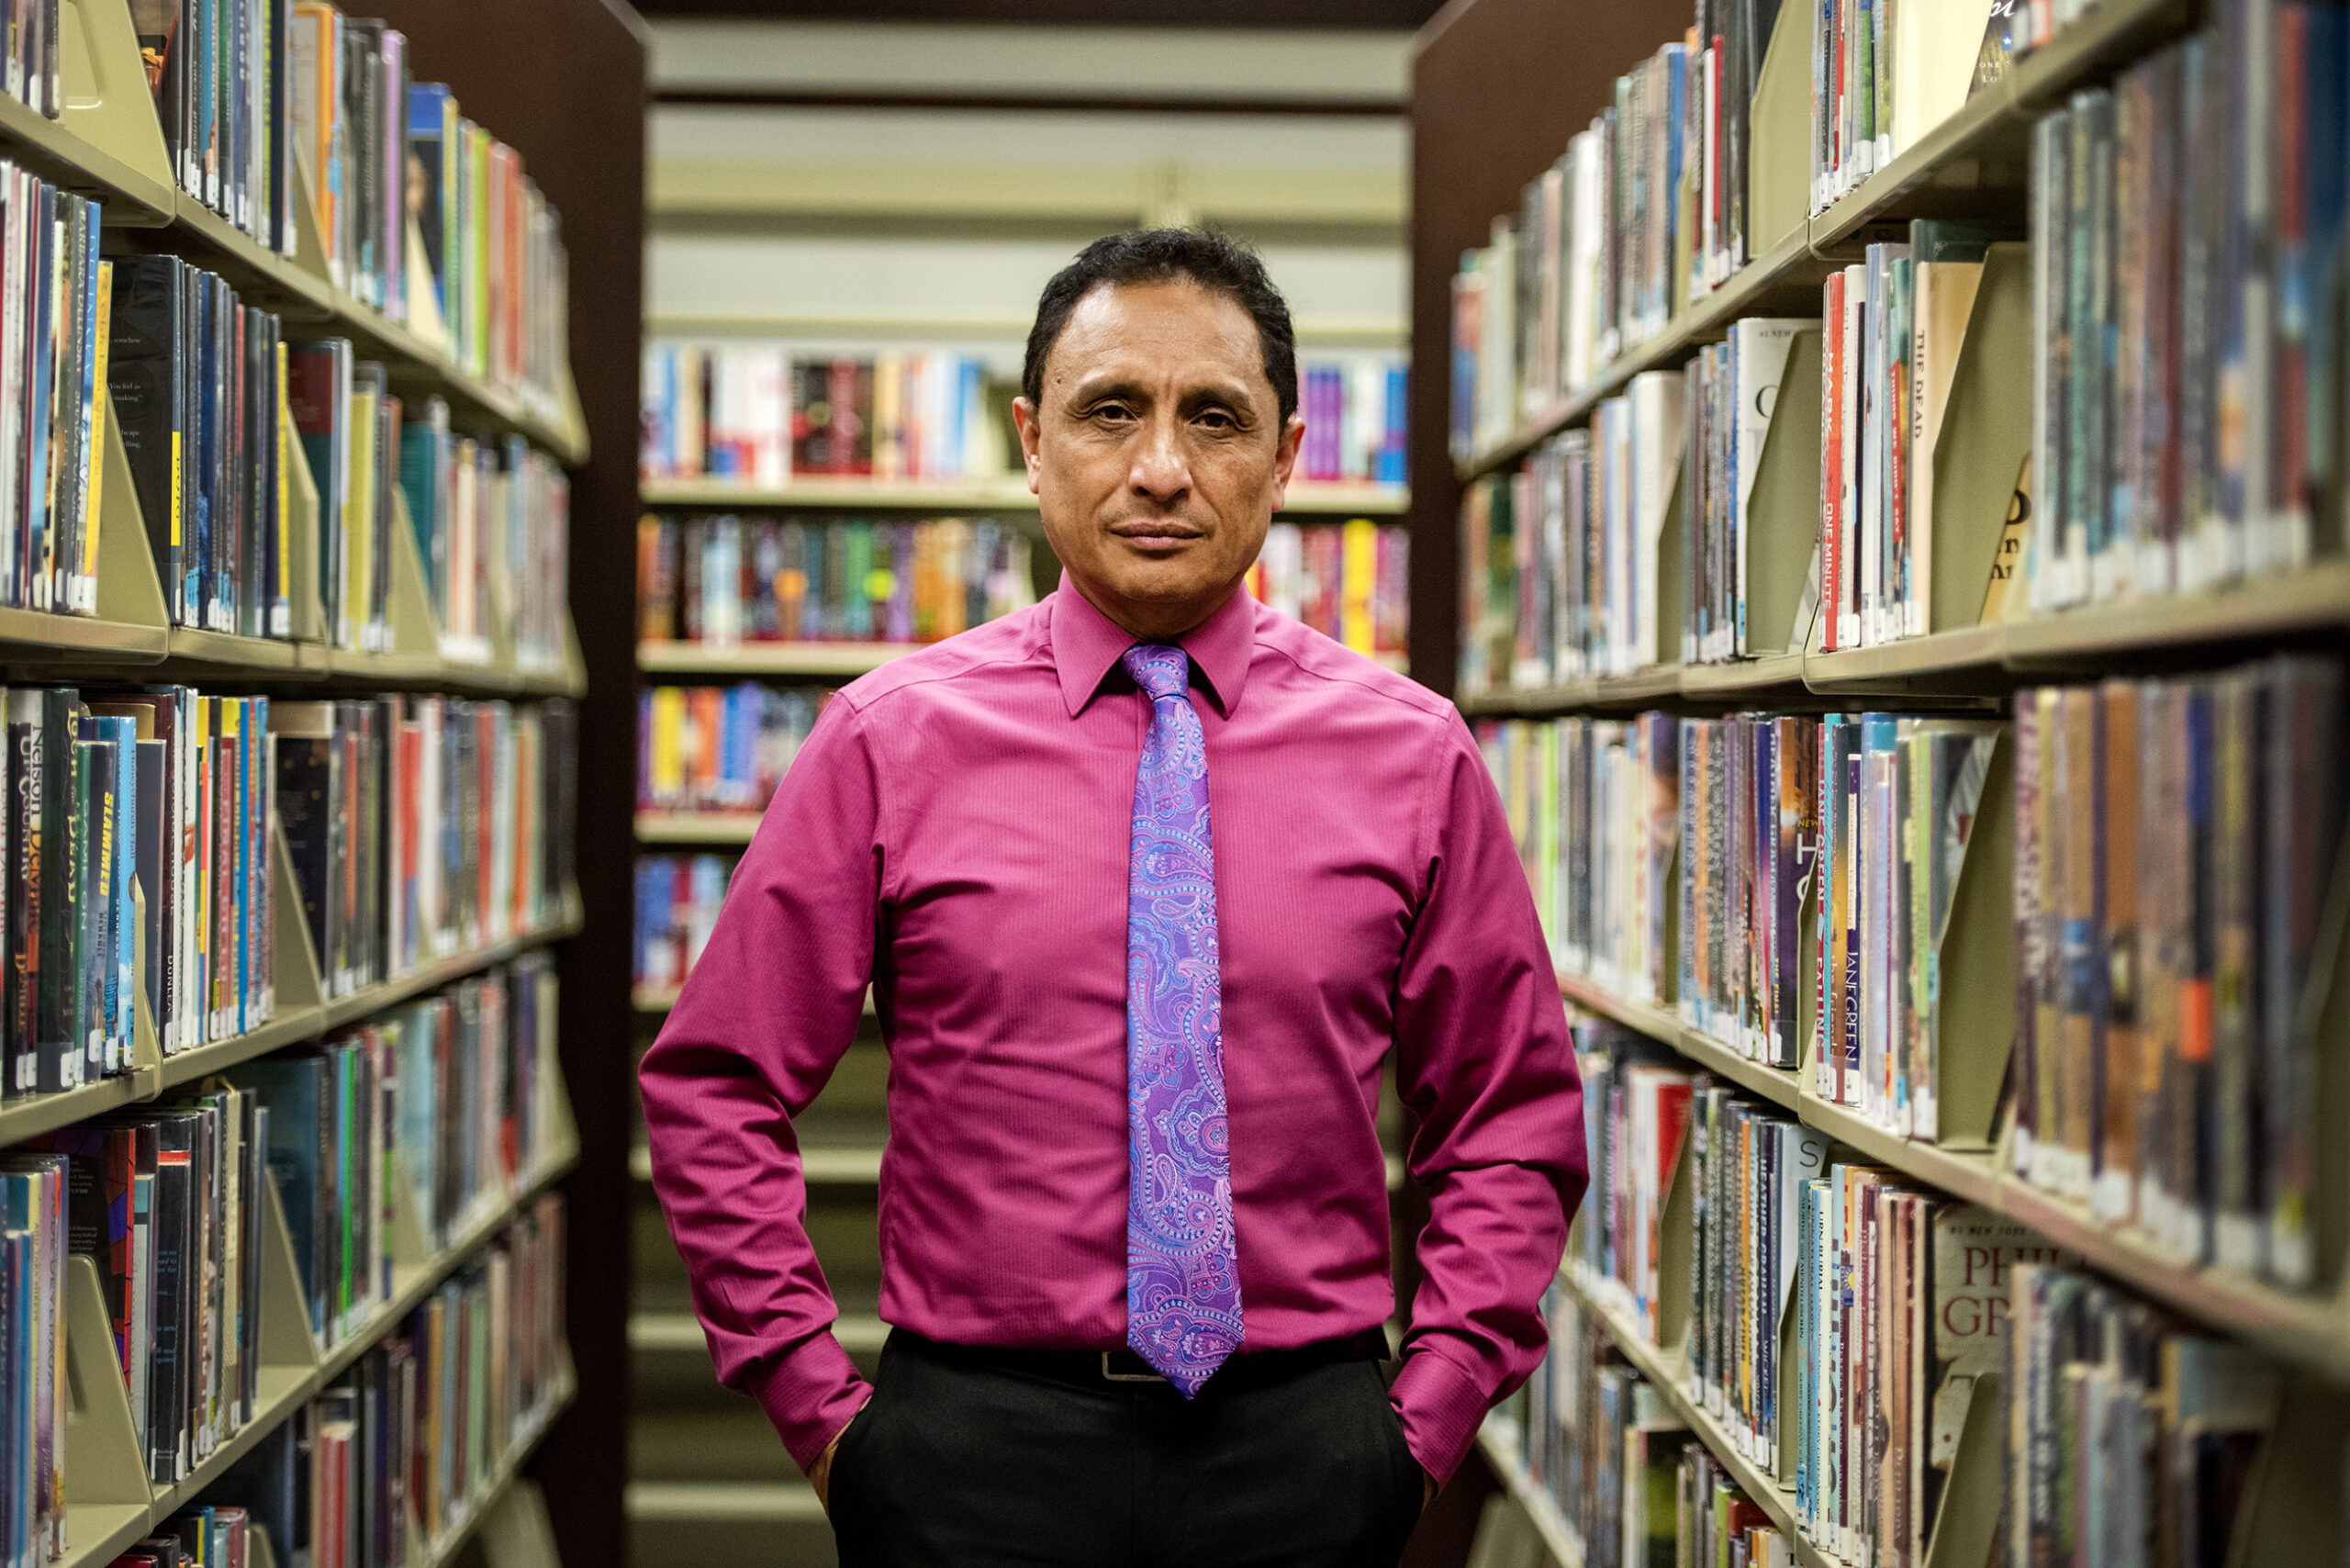 A man stands in between stacks of library books.